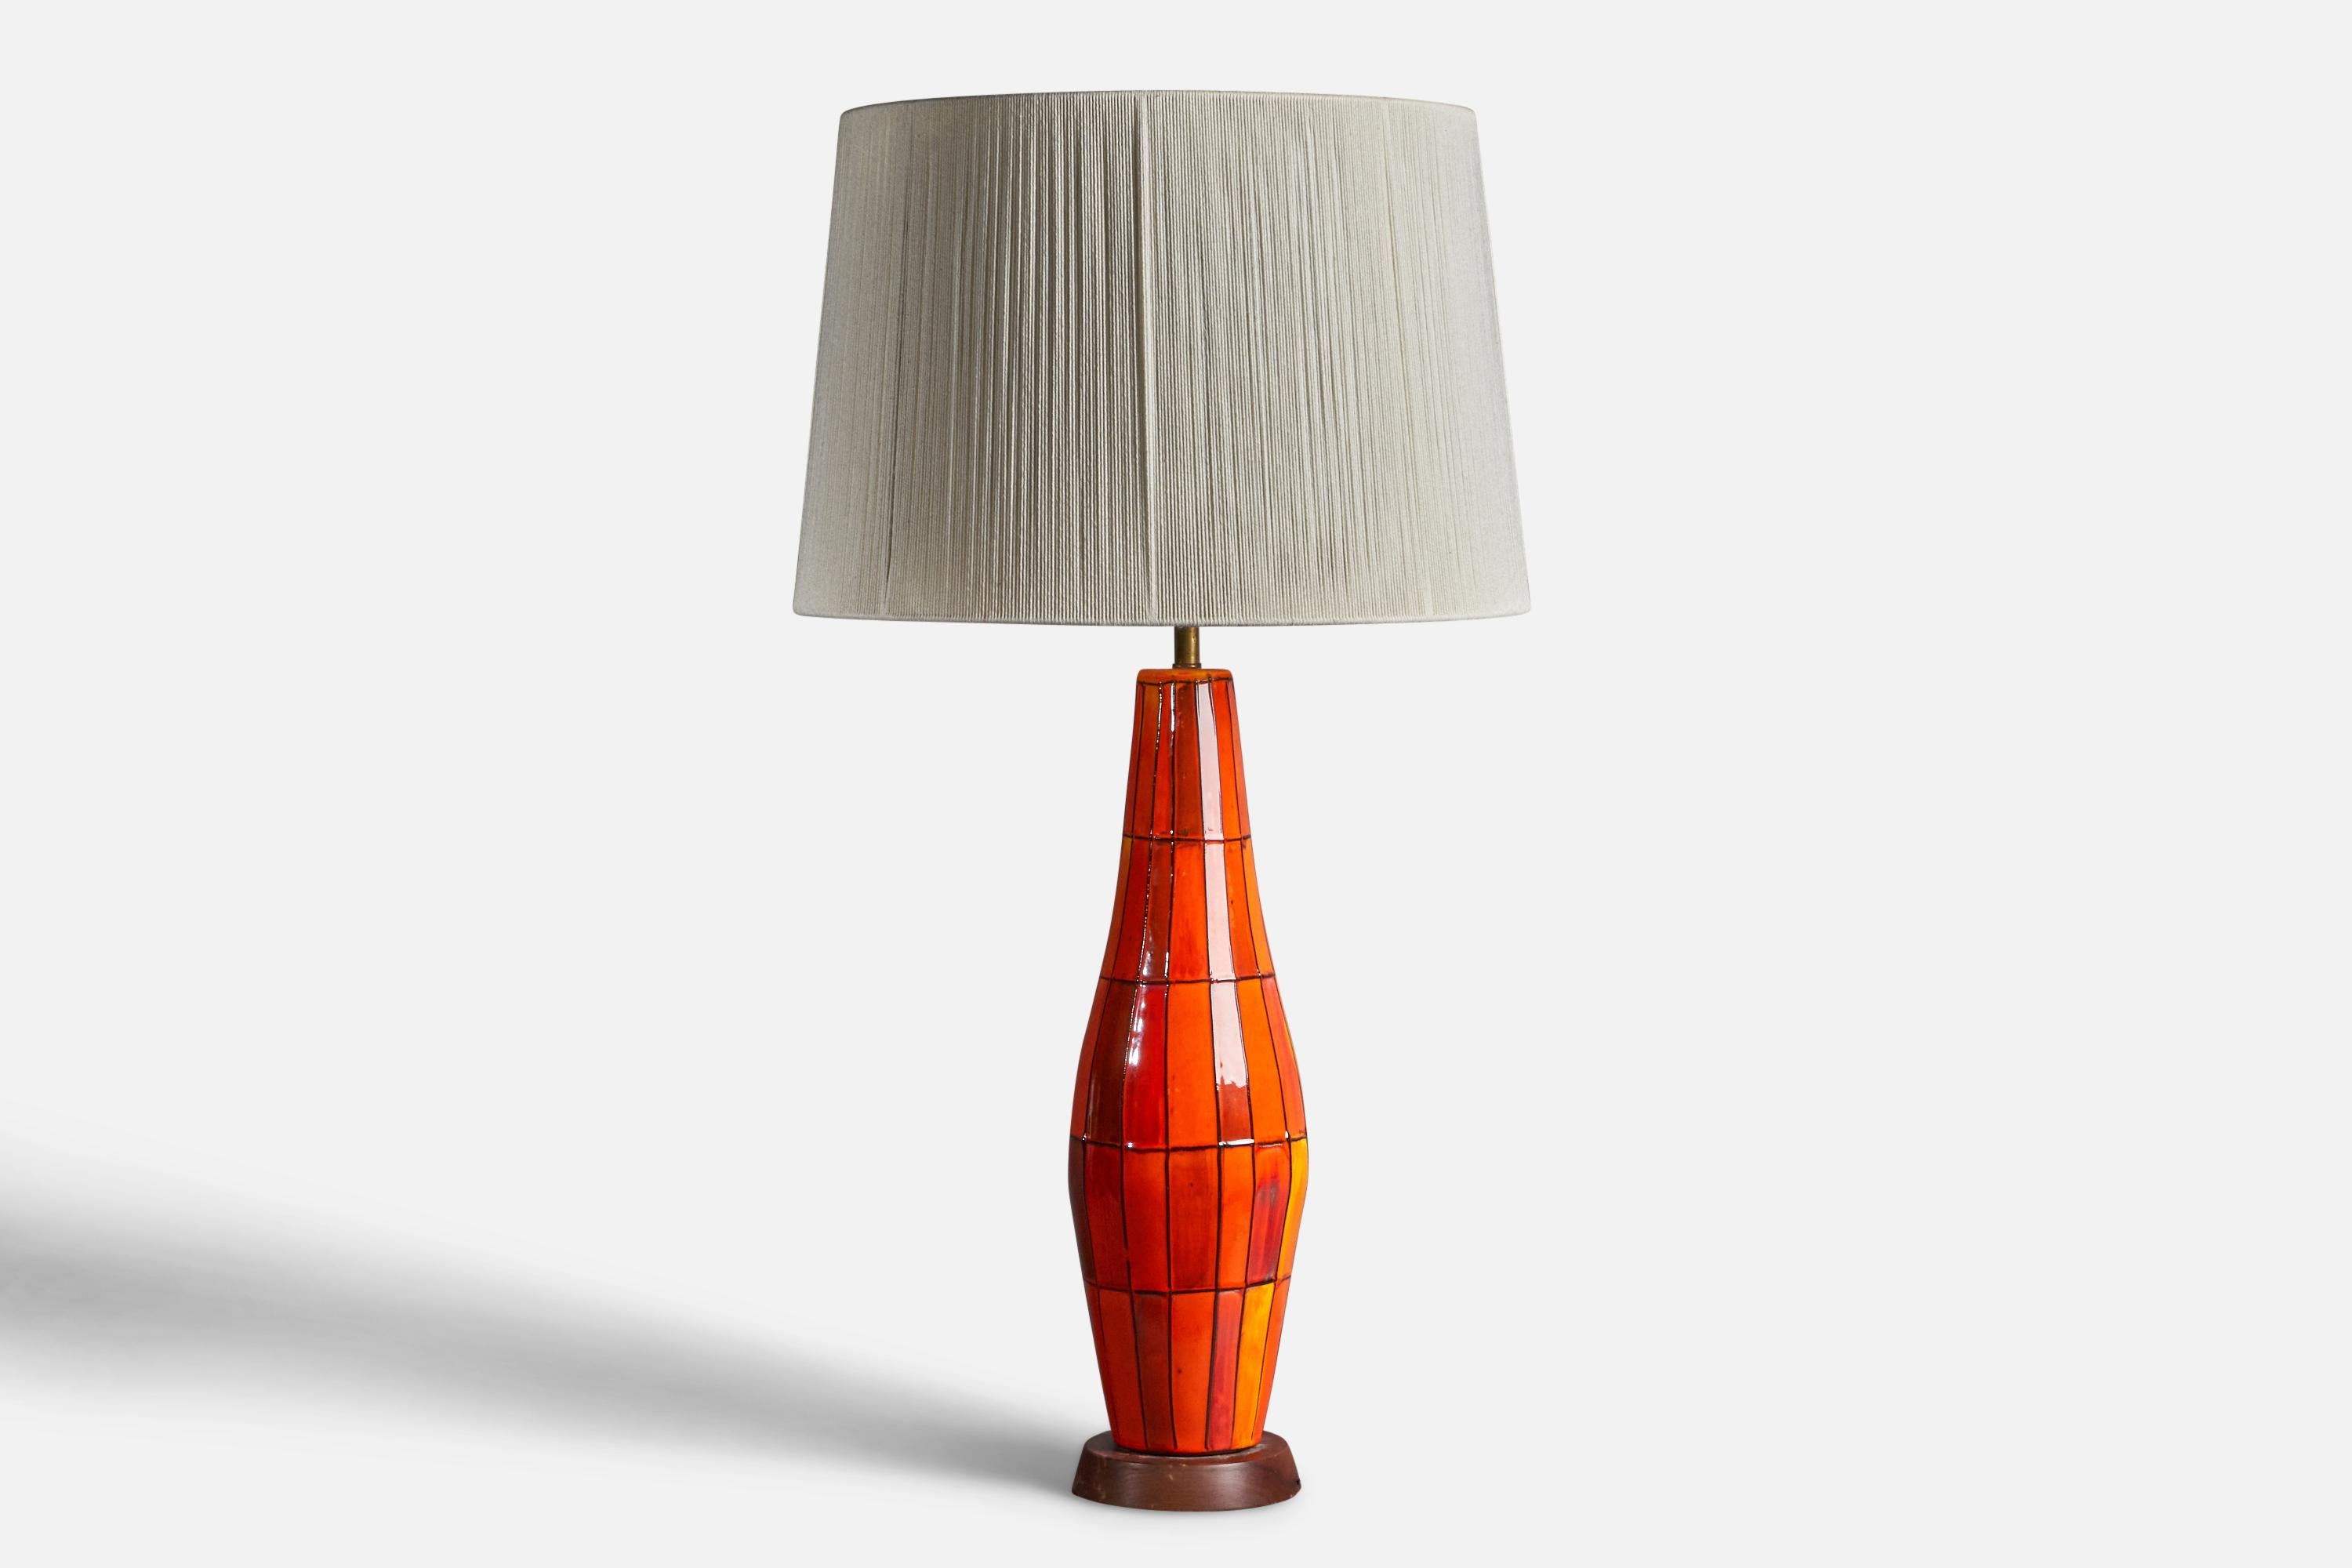 A large red-lacquered and hand-painted ceramic, walnut and string fabric table lamp, designed and produced in Italy, c. 1960s.

Overall Dimensions (inches): 40” H x 21.25” Diameter
Bulb Specifications: E-26 Bulb
Number of Sockets: 1